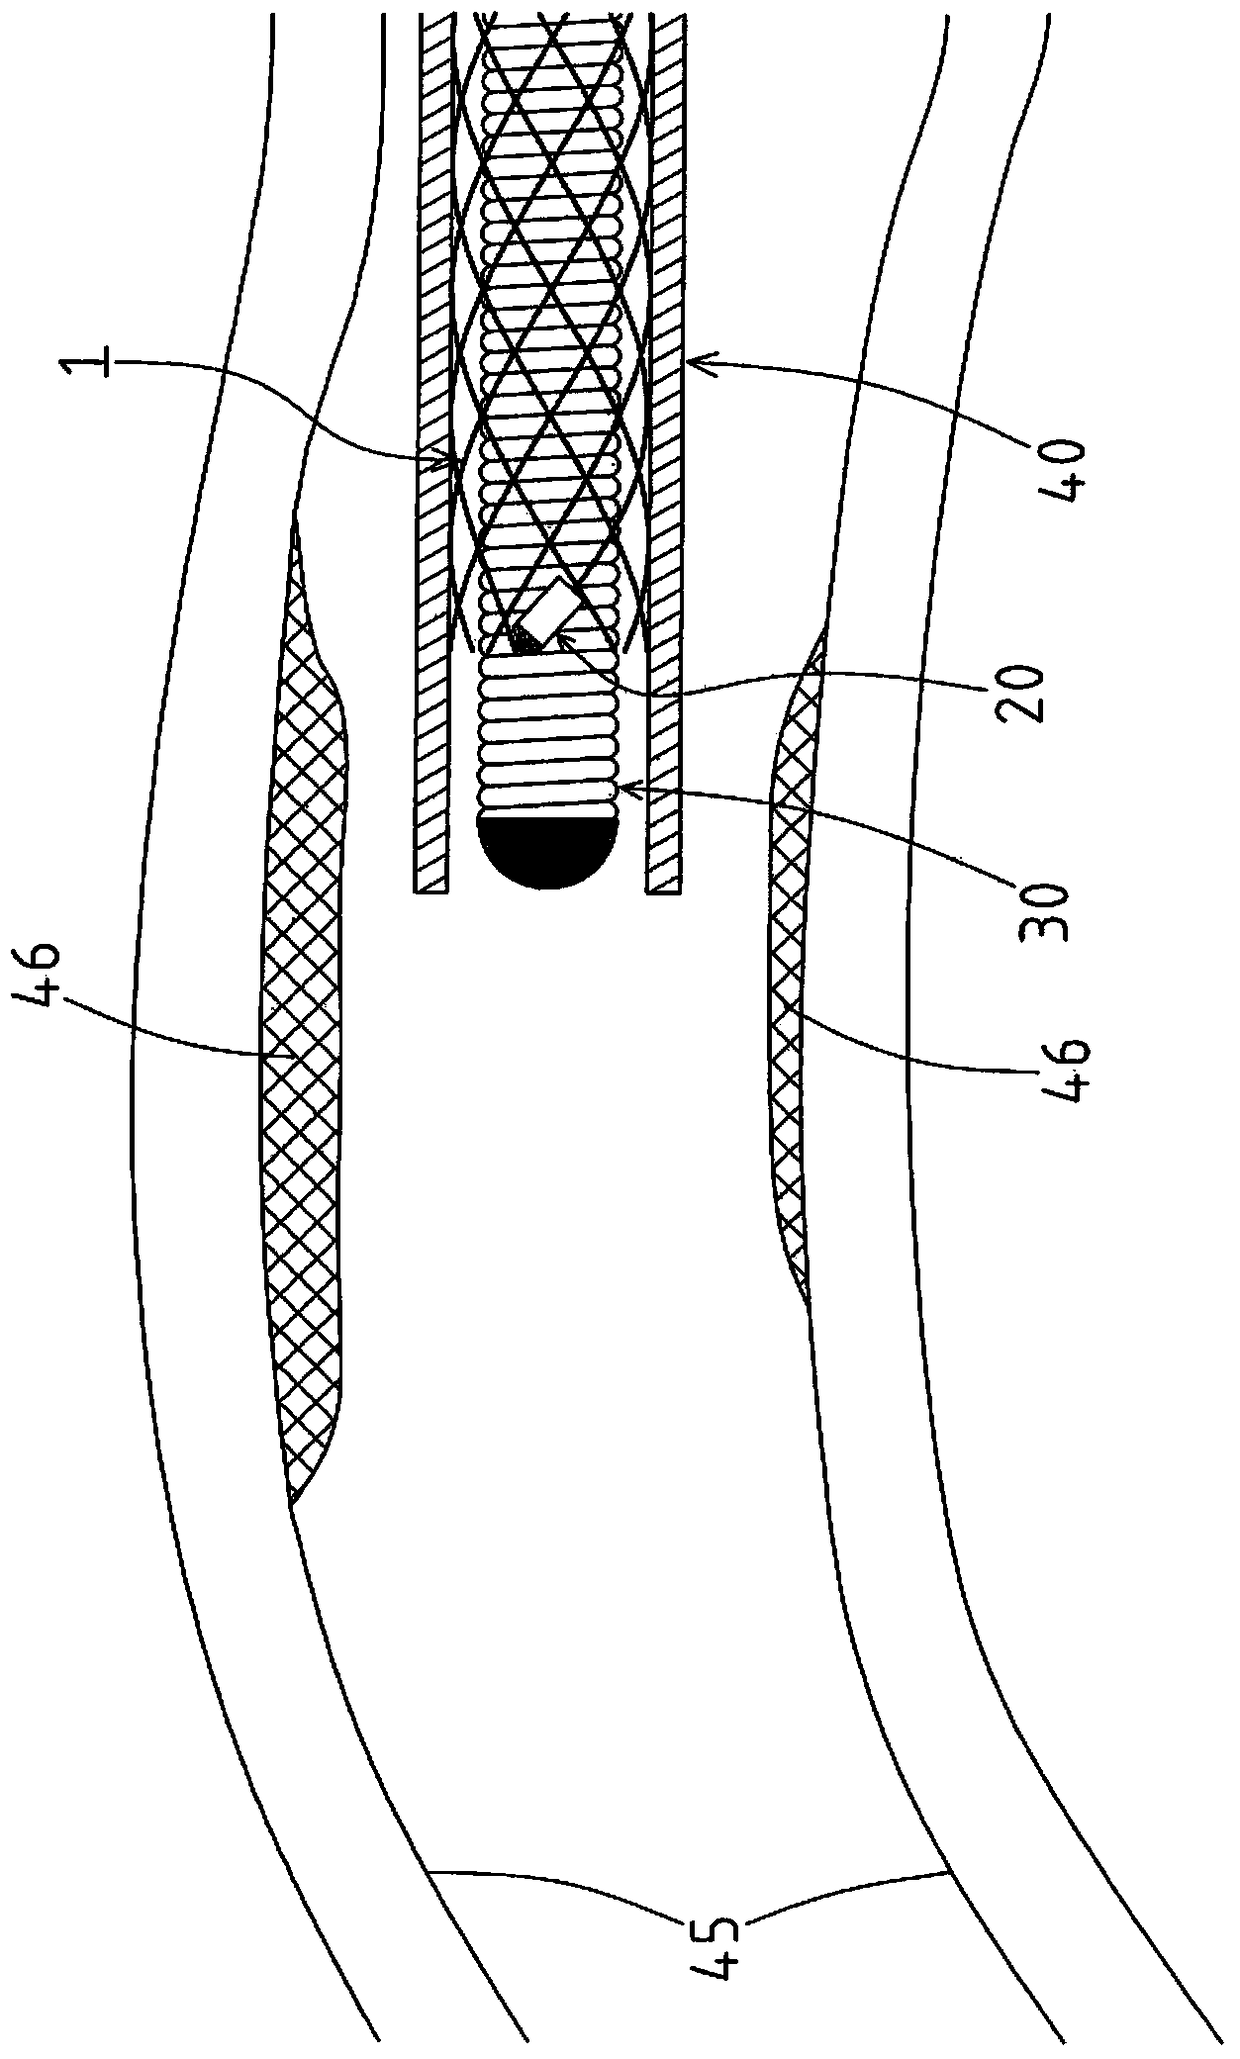 self-expanding stent